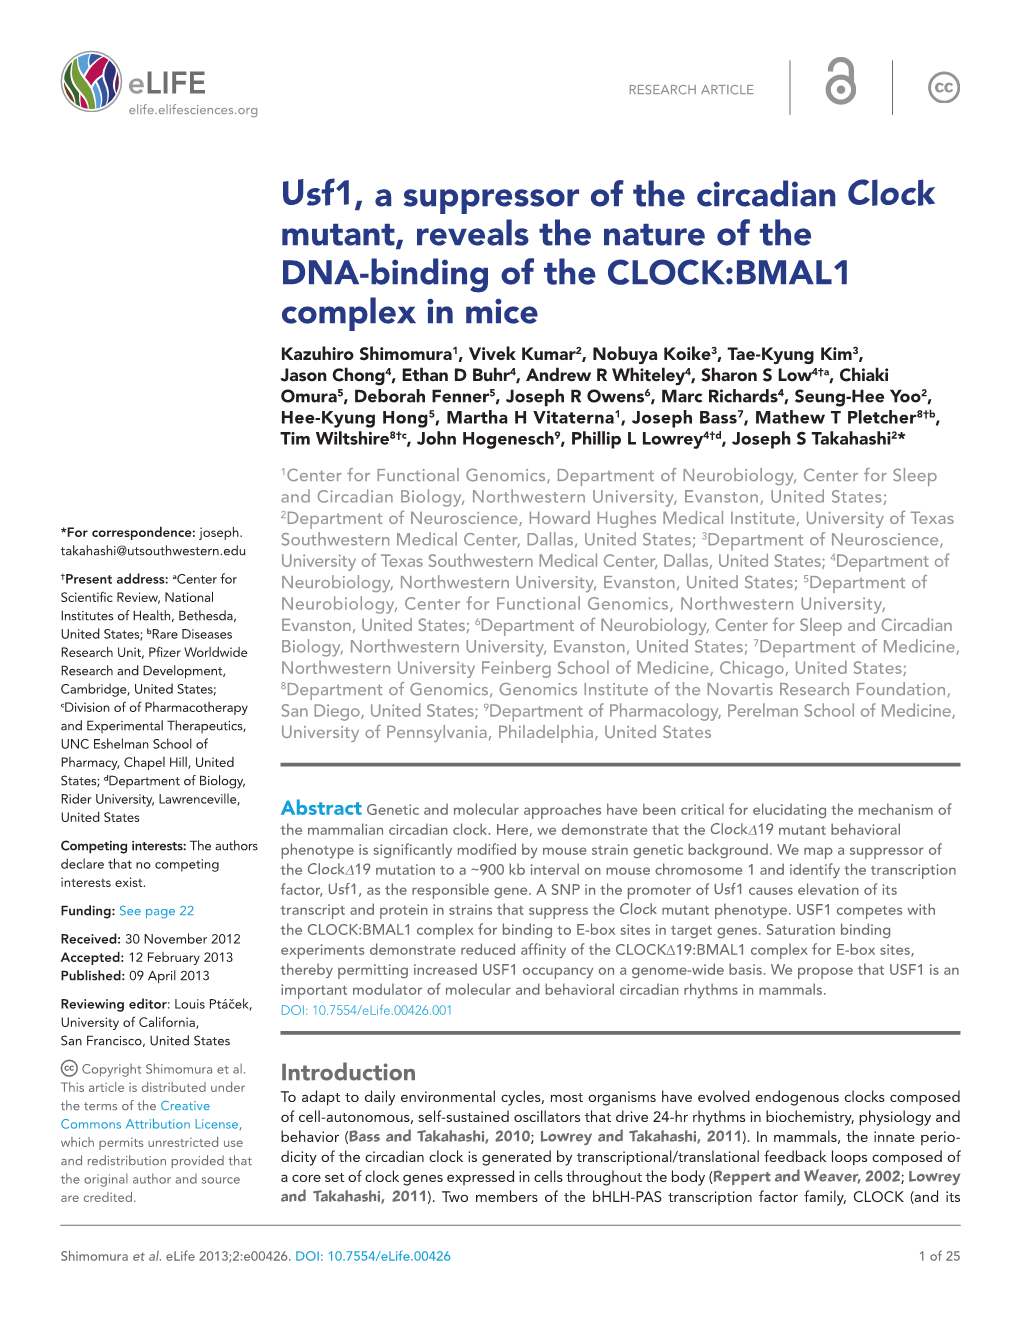 Usf1, a Suppressor of the Circadian Clock Mutant, Reveals the Nature Of